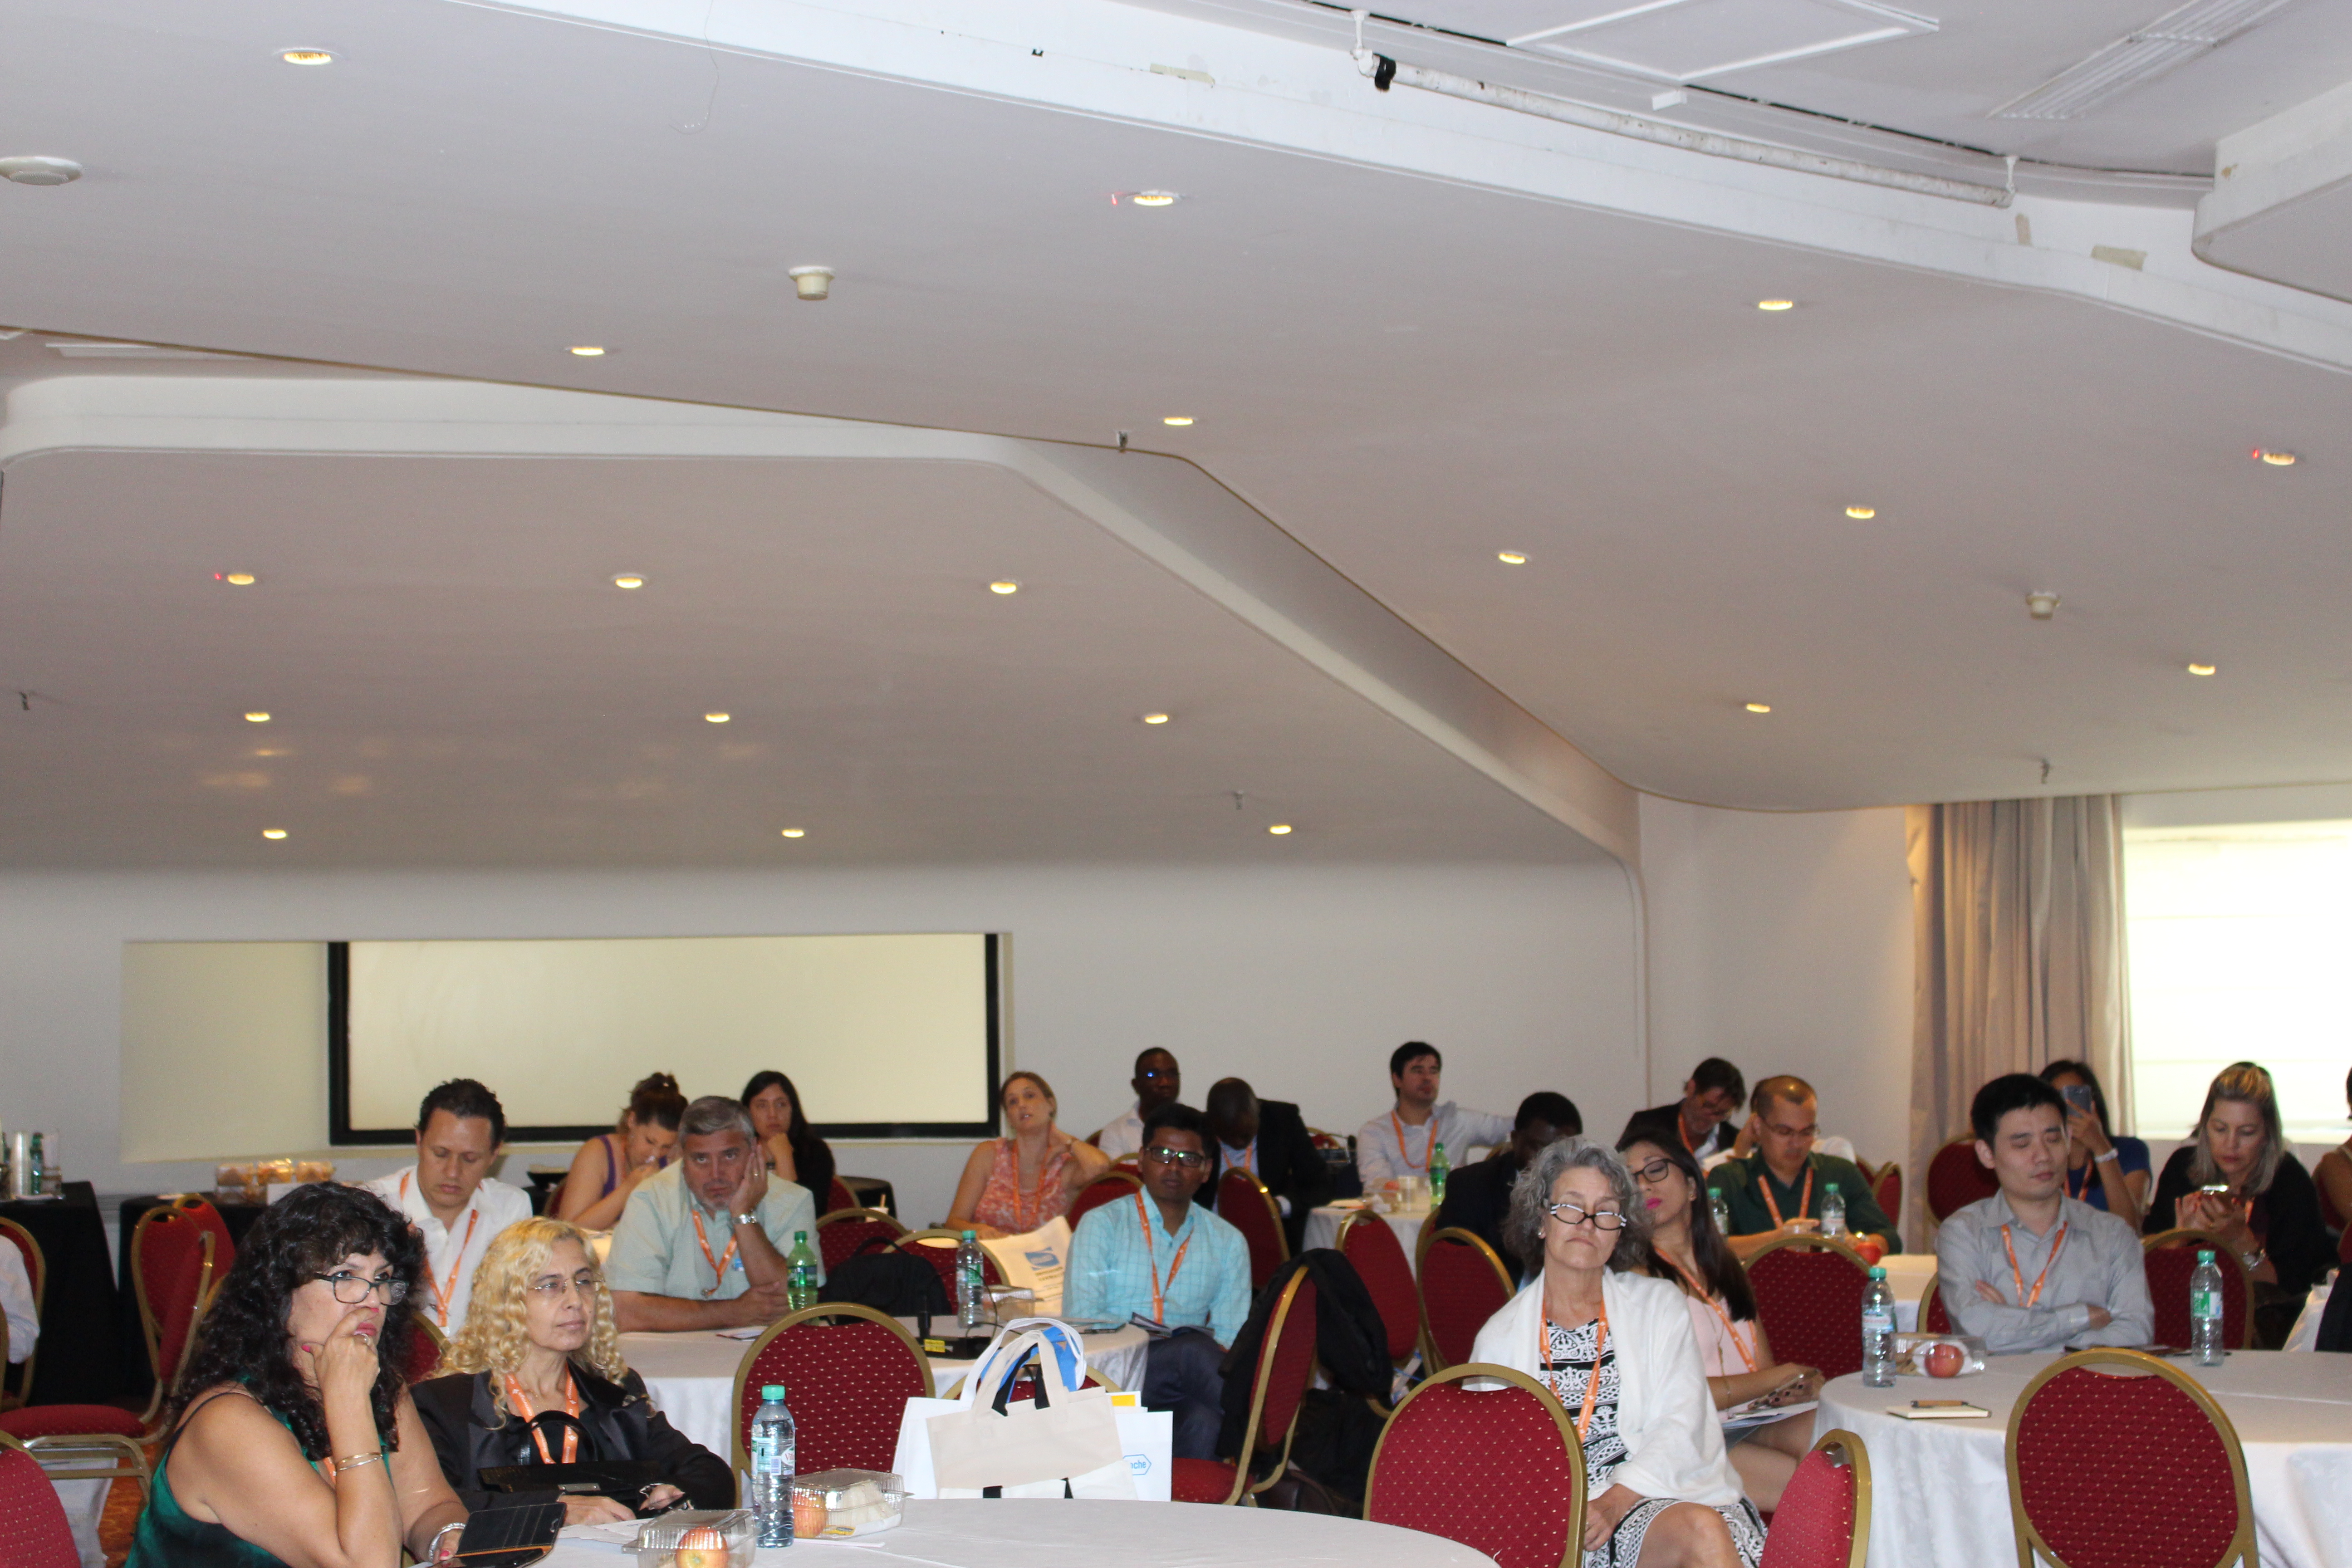 Participants at the lunch session